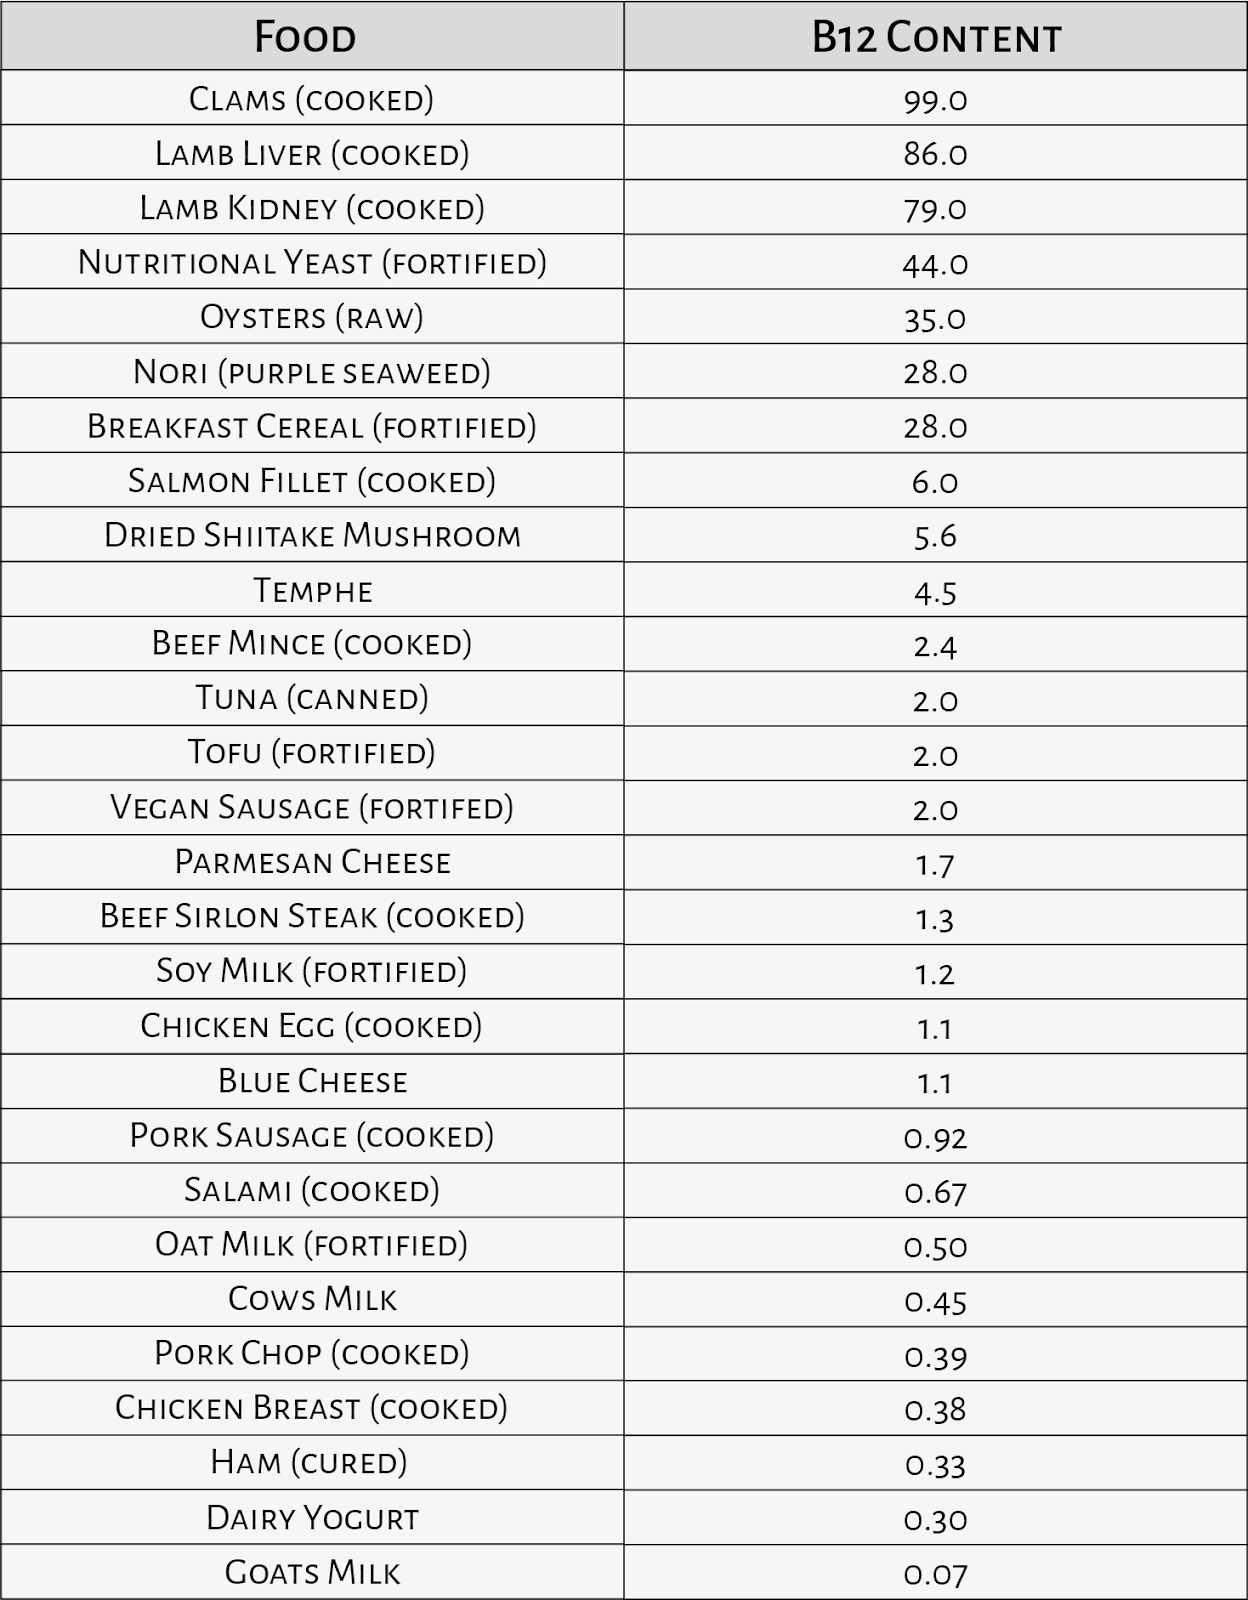 Average amount of B12 (in mcg) in 100 g of food, ranked highest to lowest